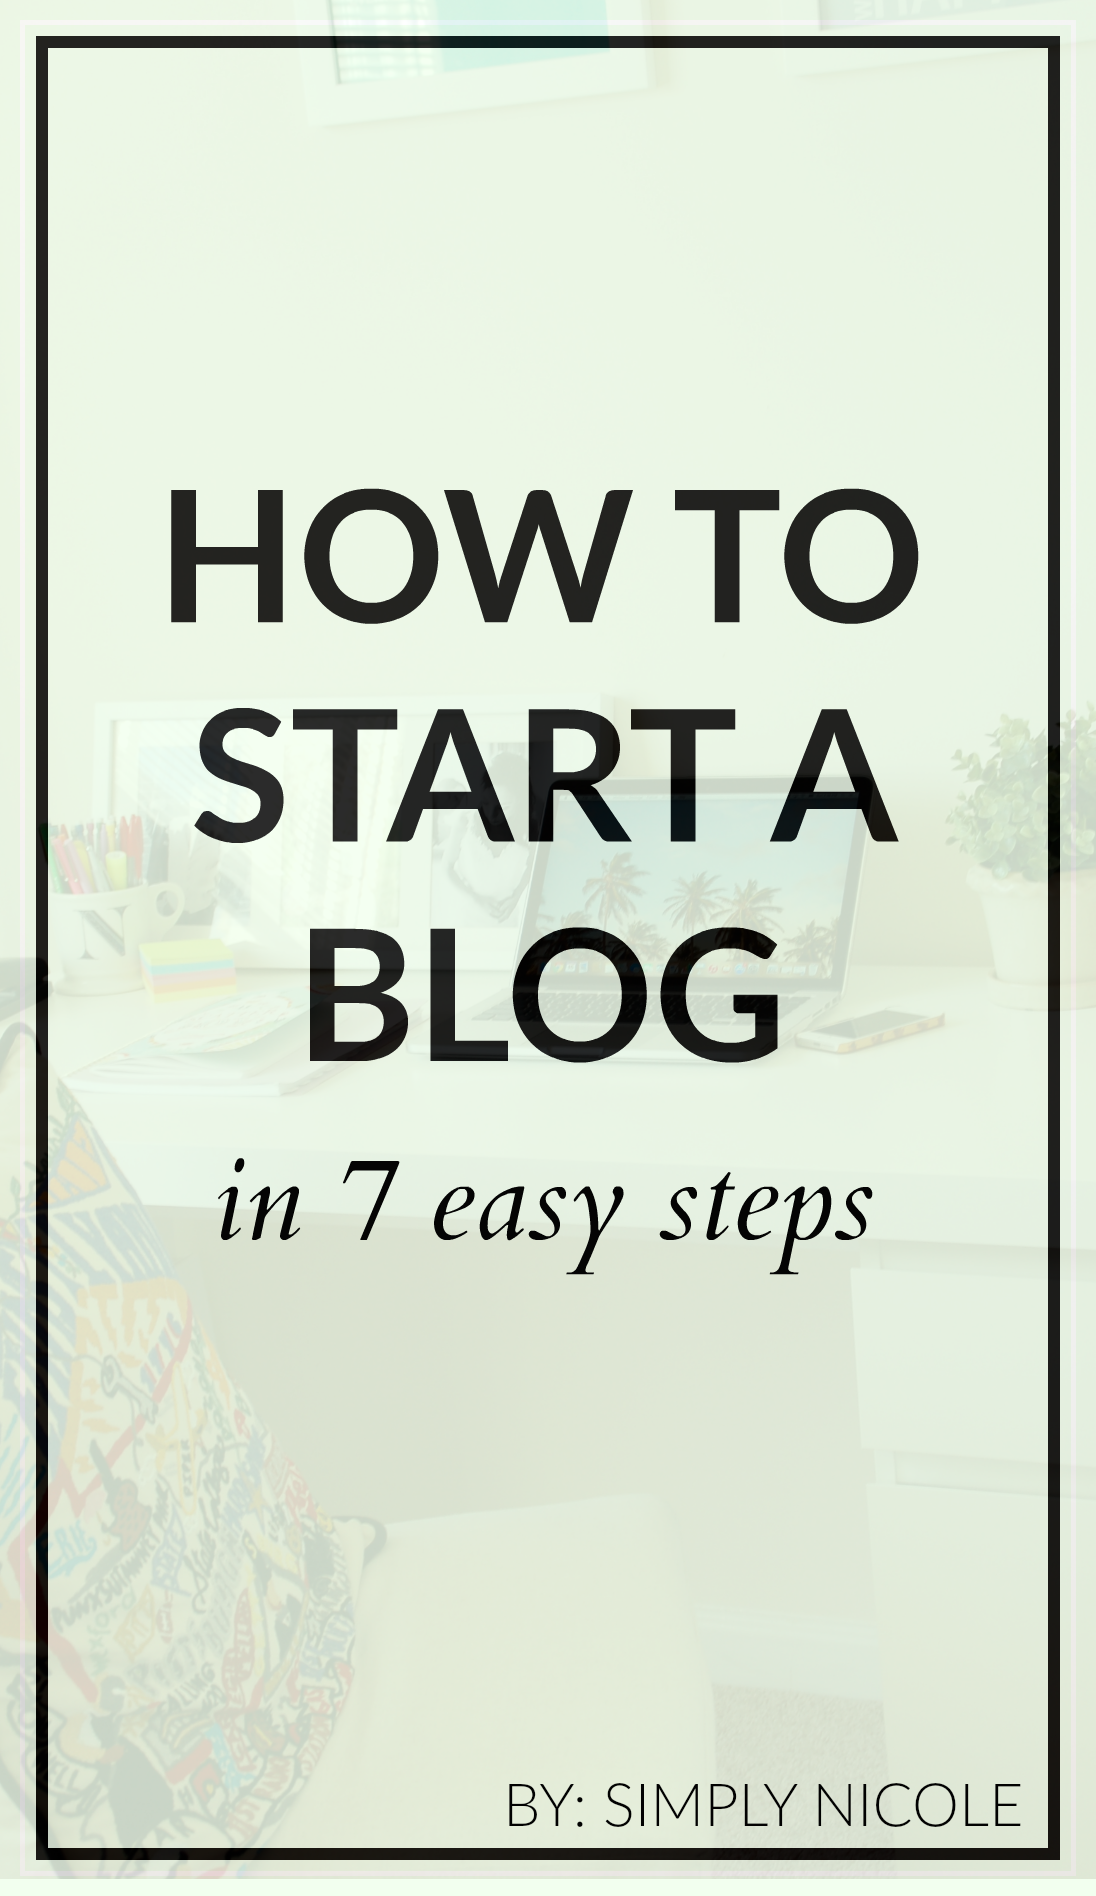 How to Start a Blog in 7 Easy Steps